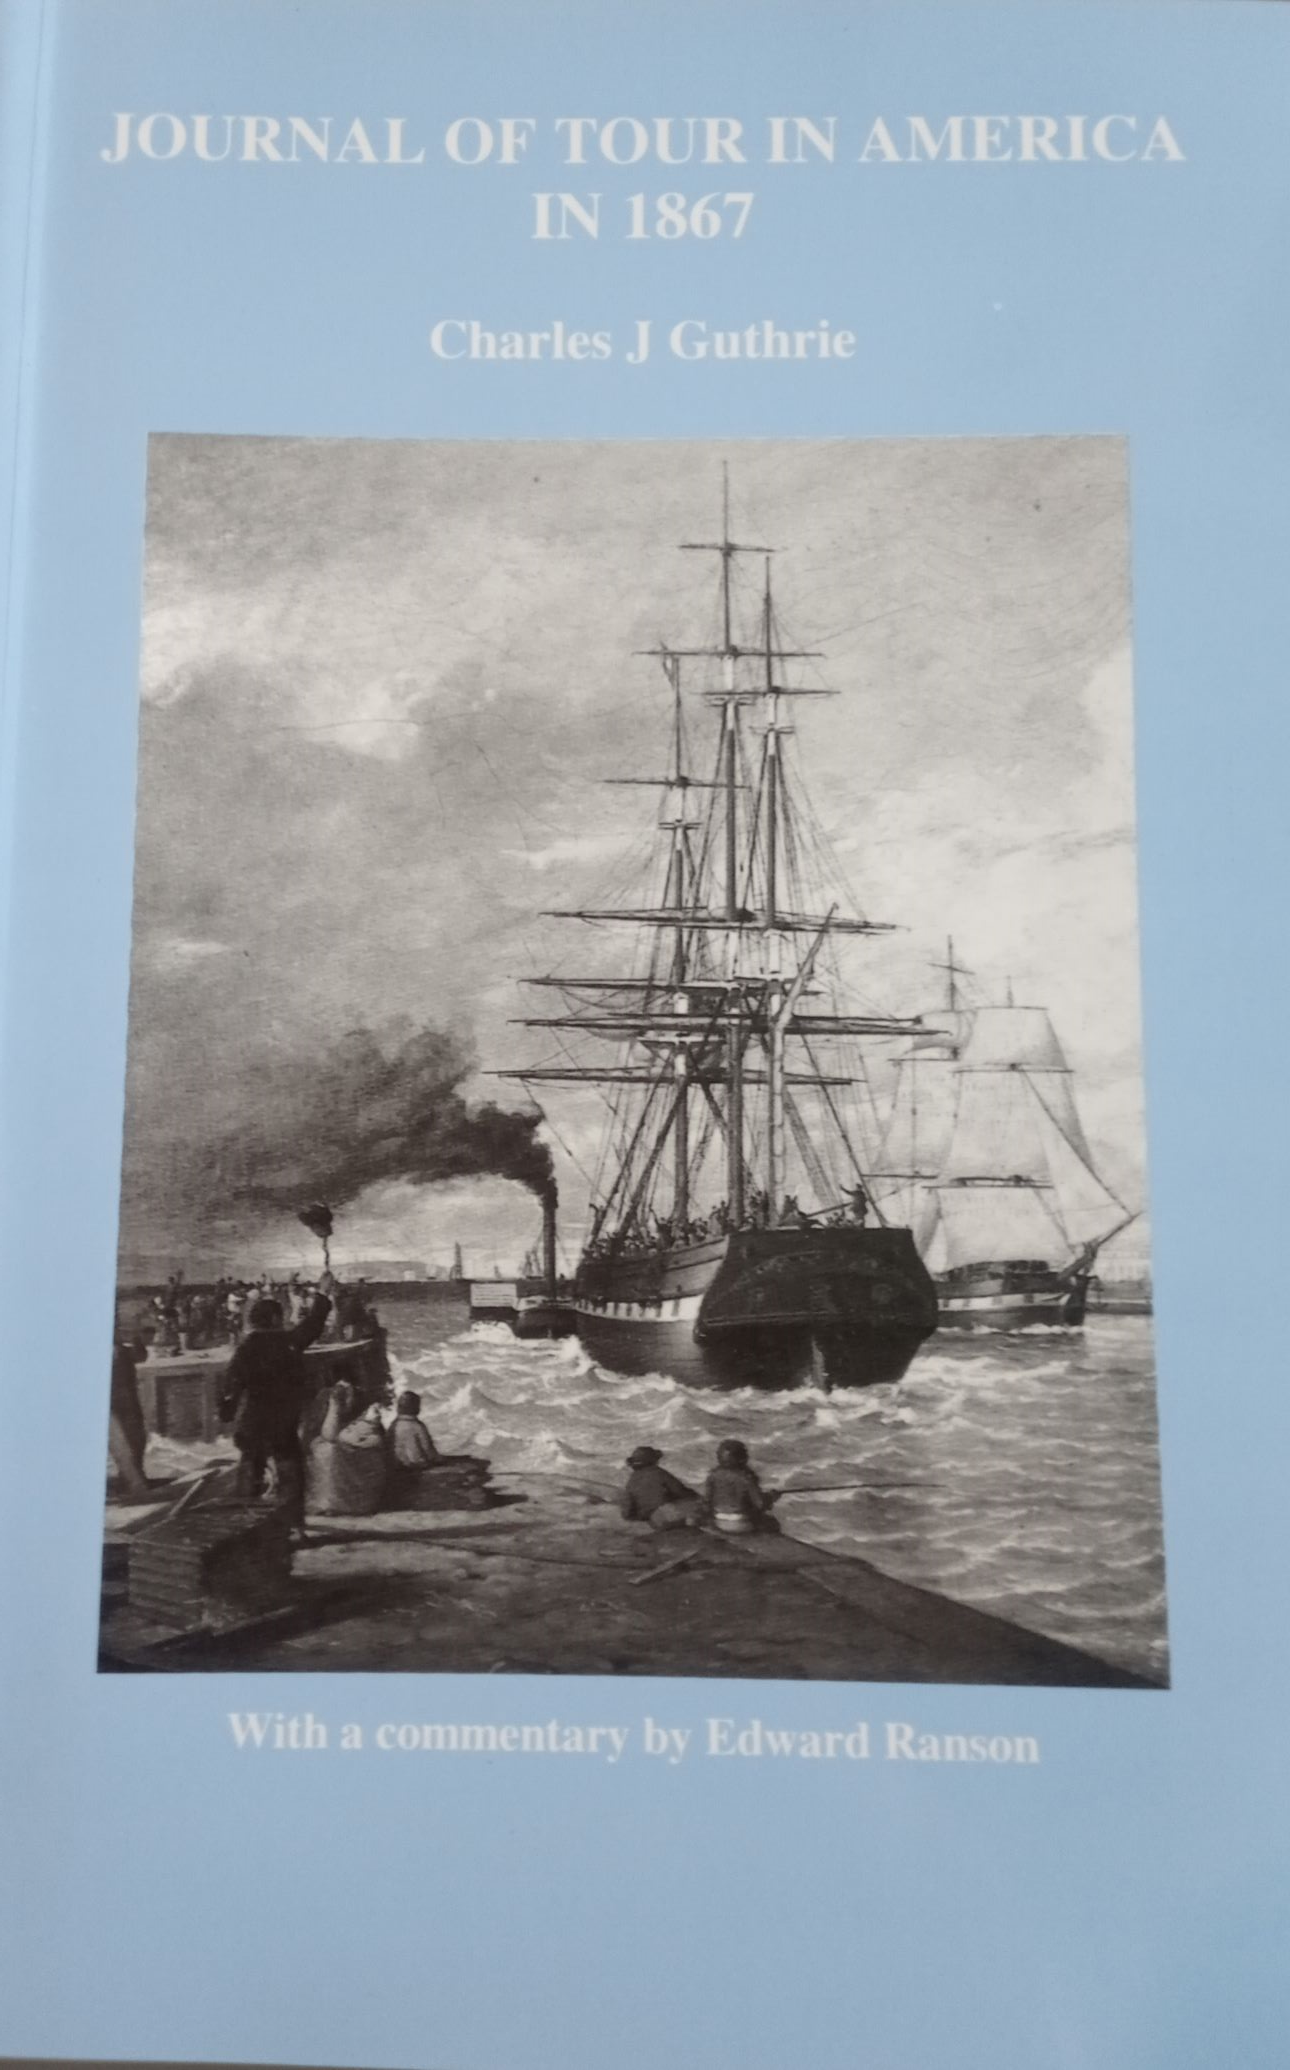 image of a sailing ship near a quay. People on the quay are waving goodbye.